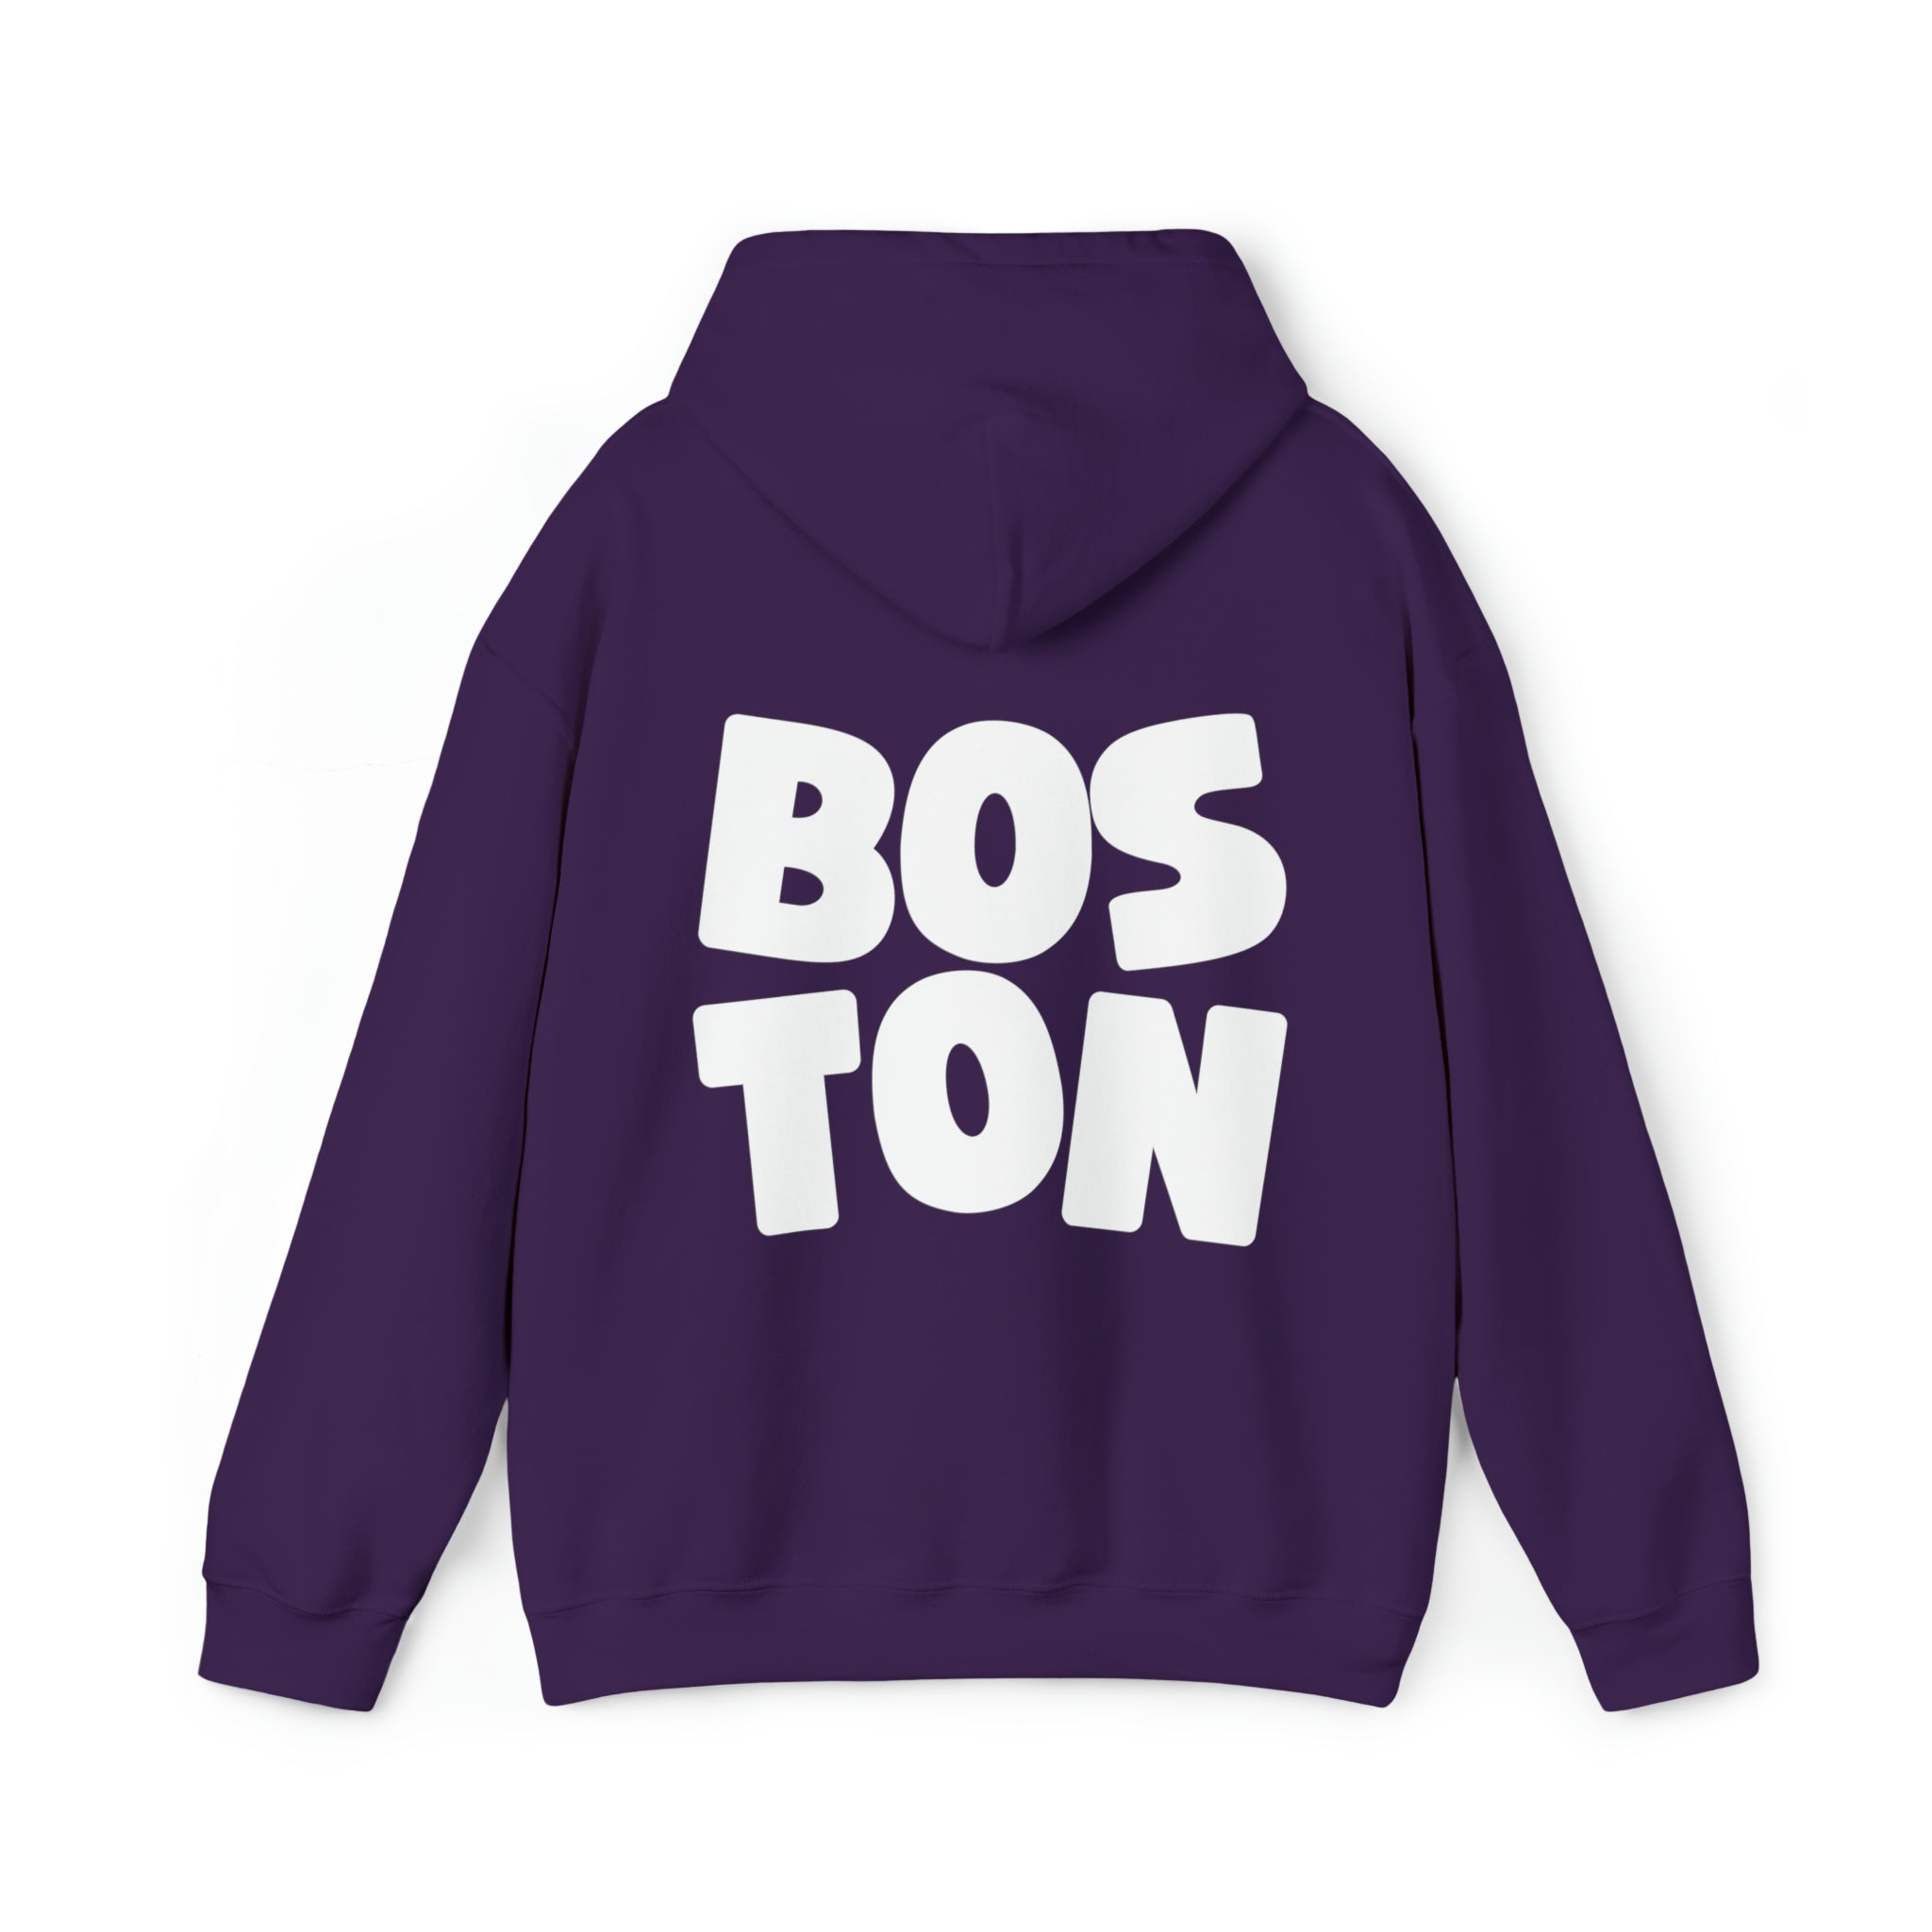 Folded Boston Hoodie Sweatshirt on a white background, emphasizing the clean design and bold lettering.